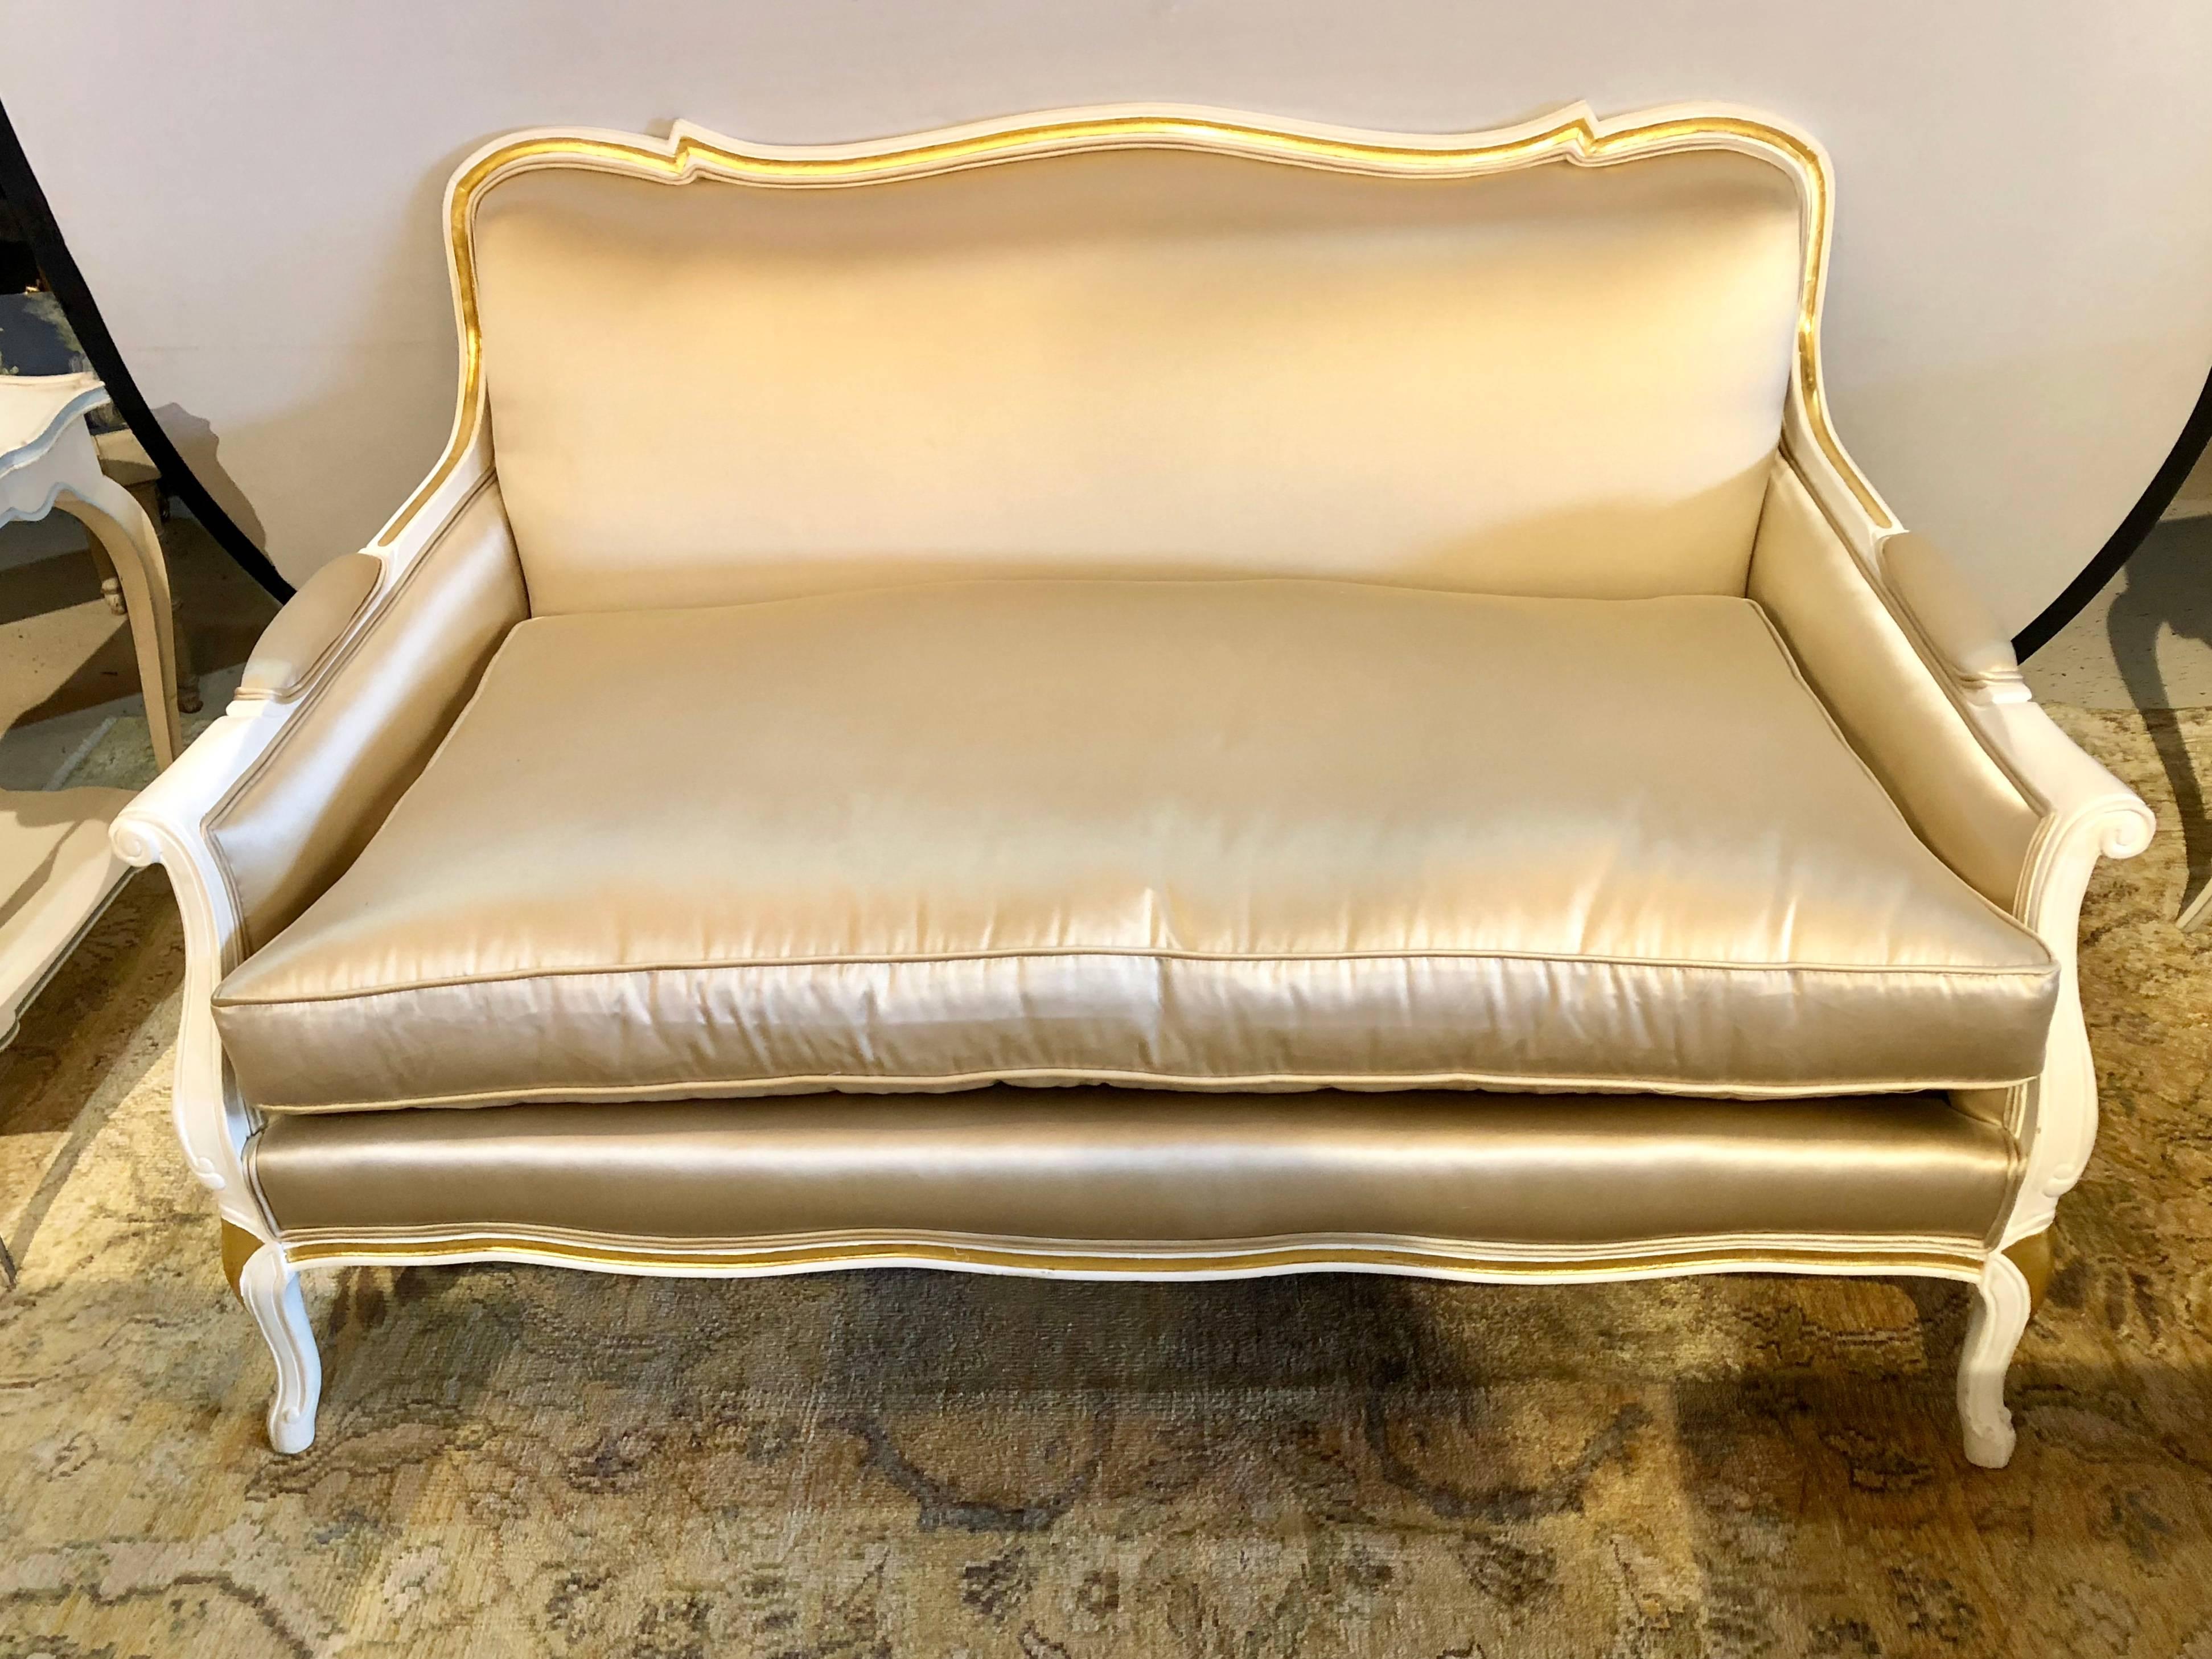 A gilt and paint decorated settee / loveseat in a fine satin upholstery. In this Louis XV style this fine Hollywood Regency sofa is as stylish as one could possible dream of. The finely custom upholstered sofa having two matching cushions. Directly